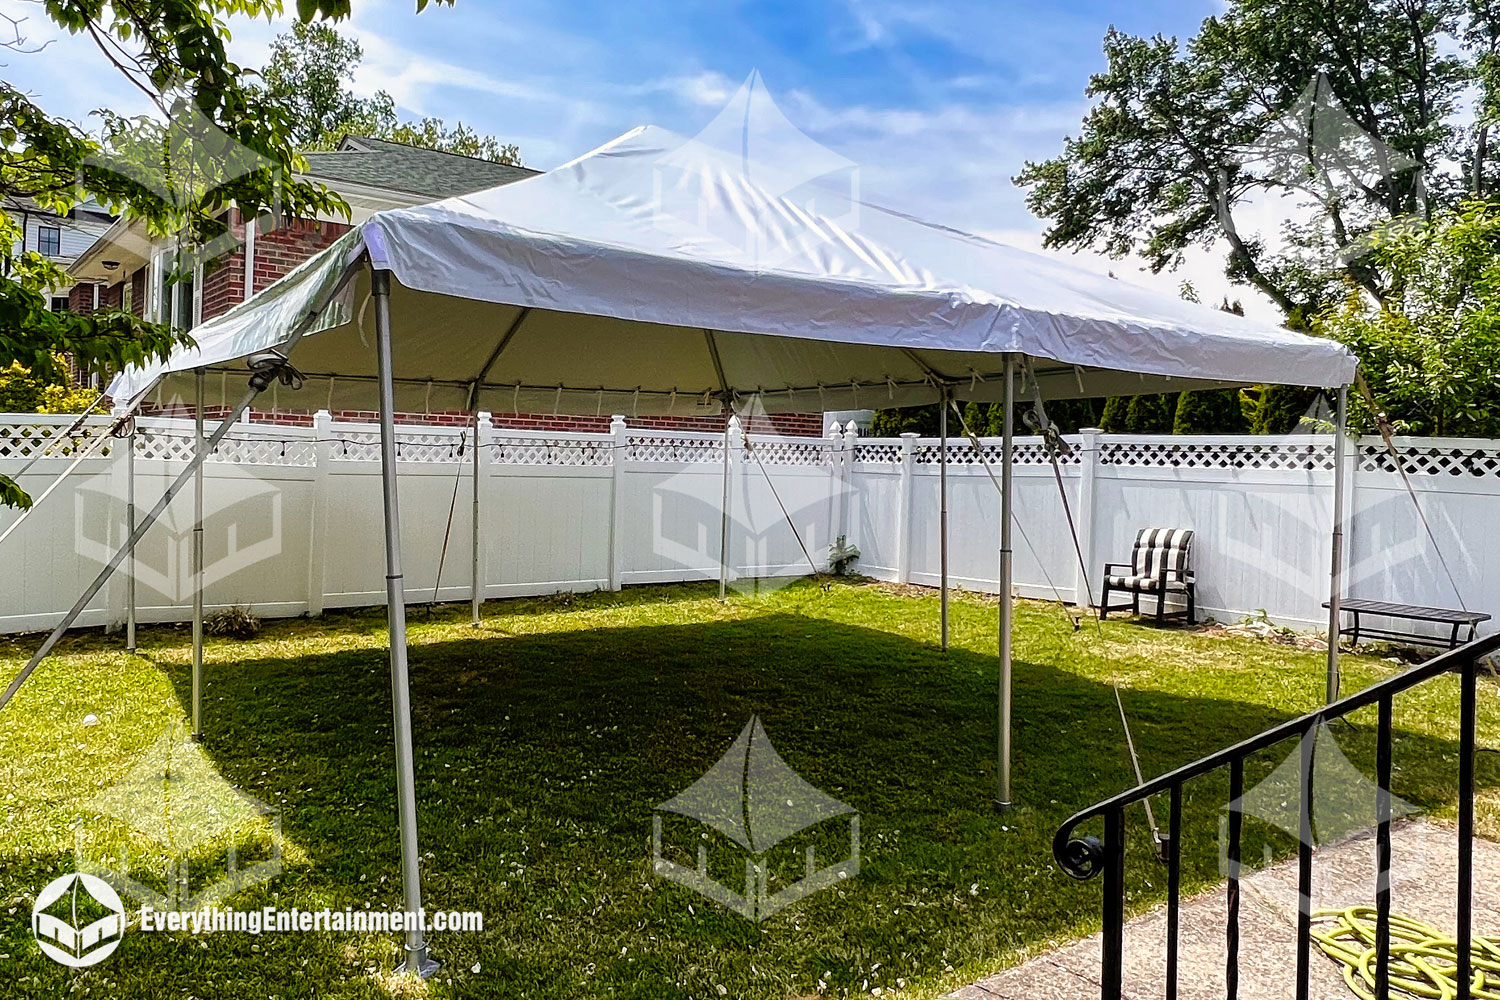 15x15 Party Tent with white top set up in backyard on grass